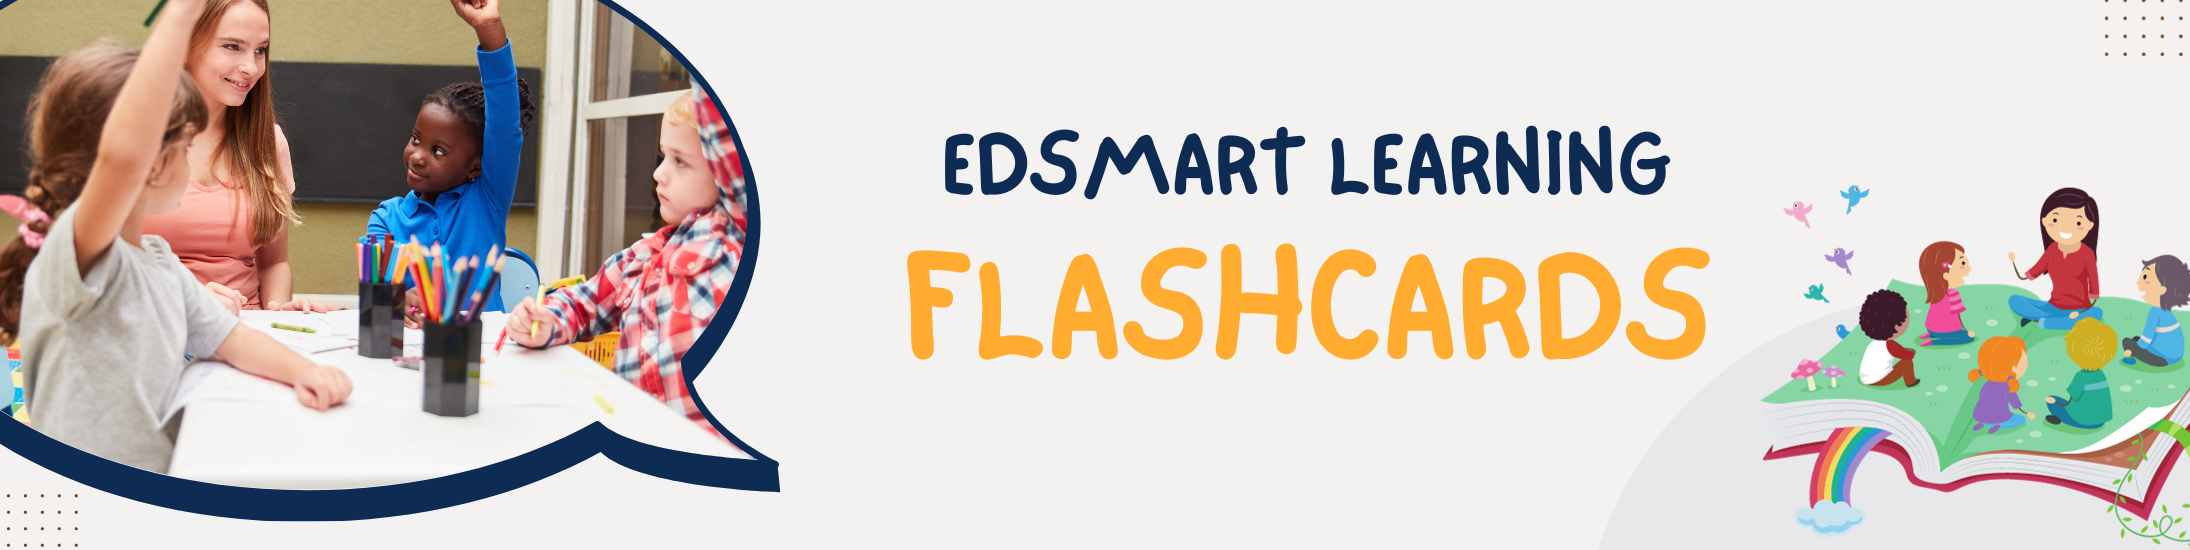 Edsmart Early Learning Flashcards: Nurturing Young Minds through Engaging Education